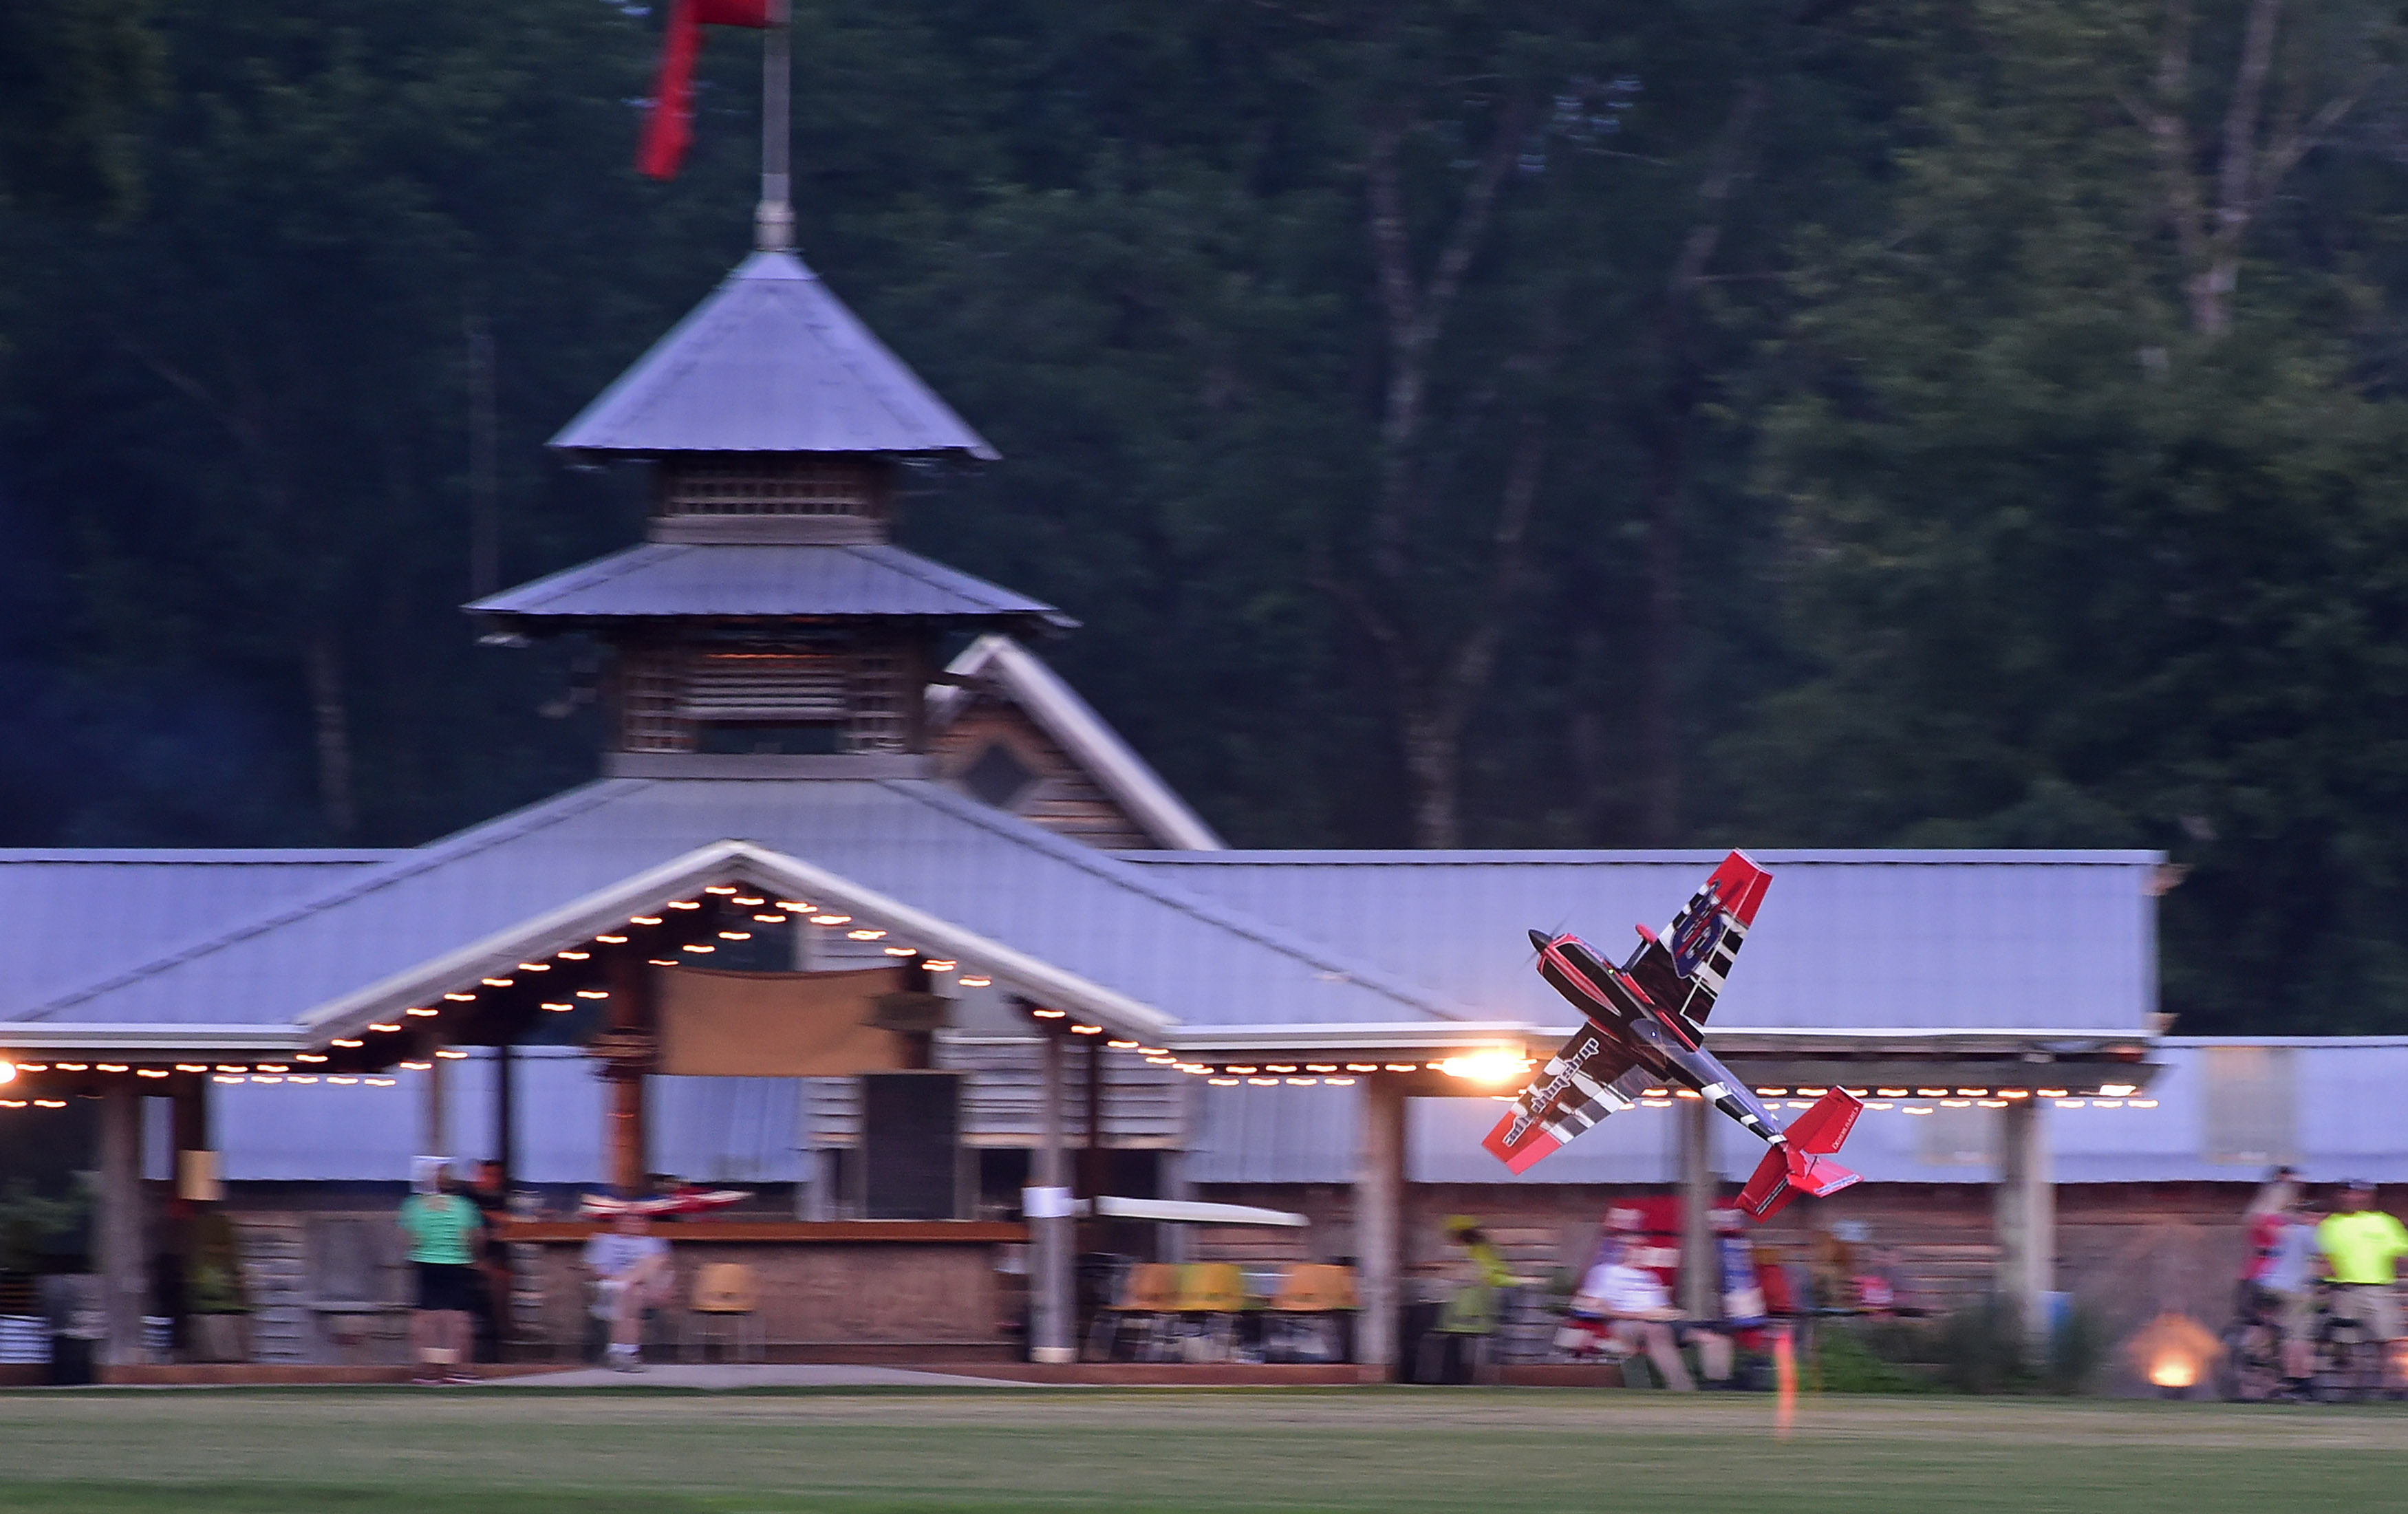 A remote-controlled aerobatic demonstration takes place near the main gazebo during the Young Aviators Fly-In at Triple Tree Aerodrome June 8 to 10 in Woodruff, South Carolina. Photo by David Tulis.